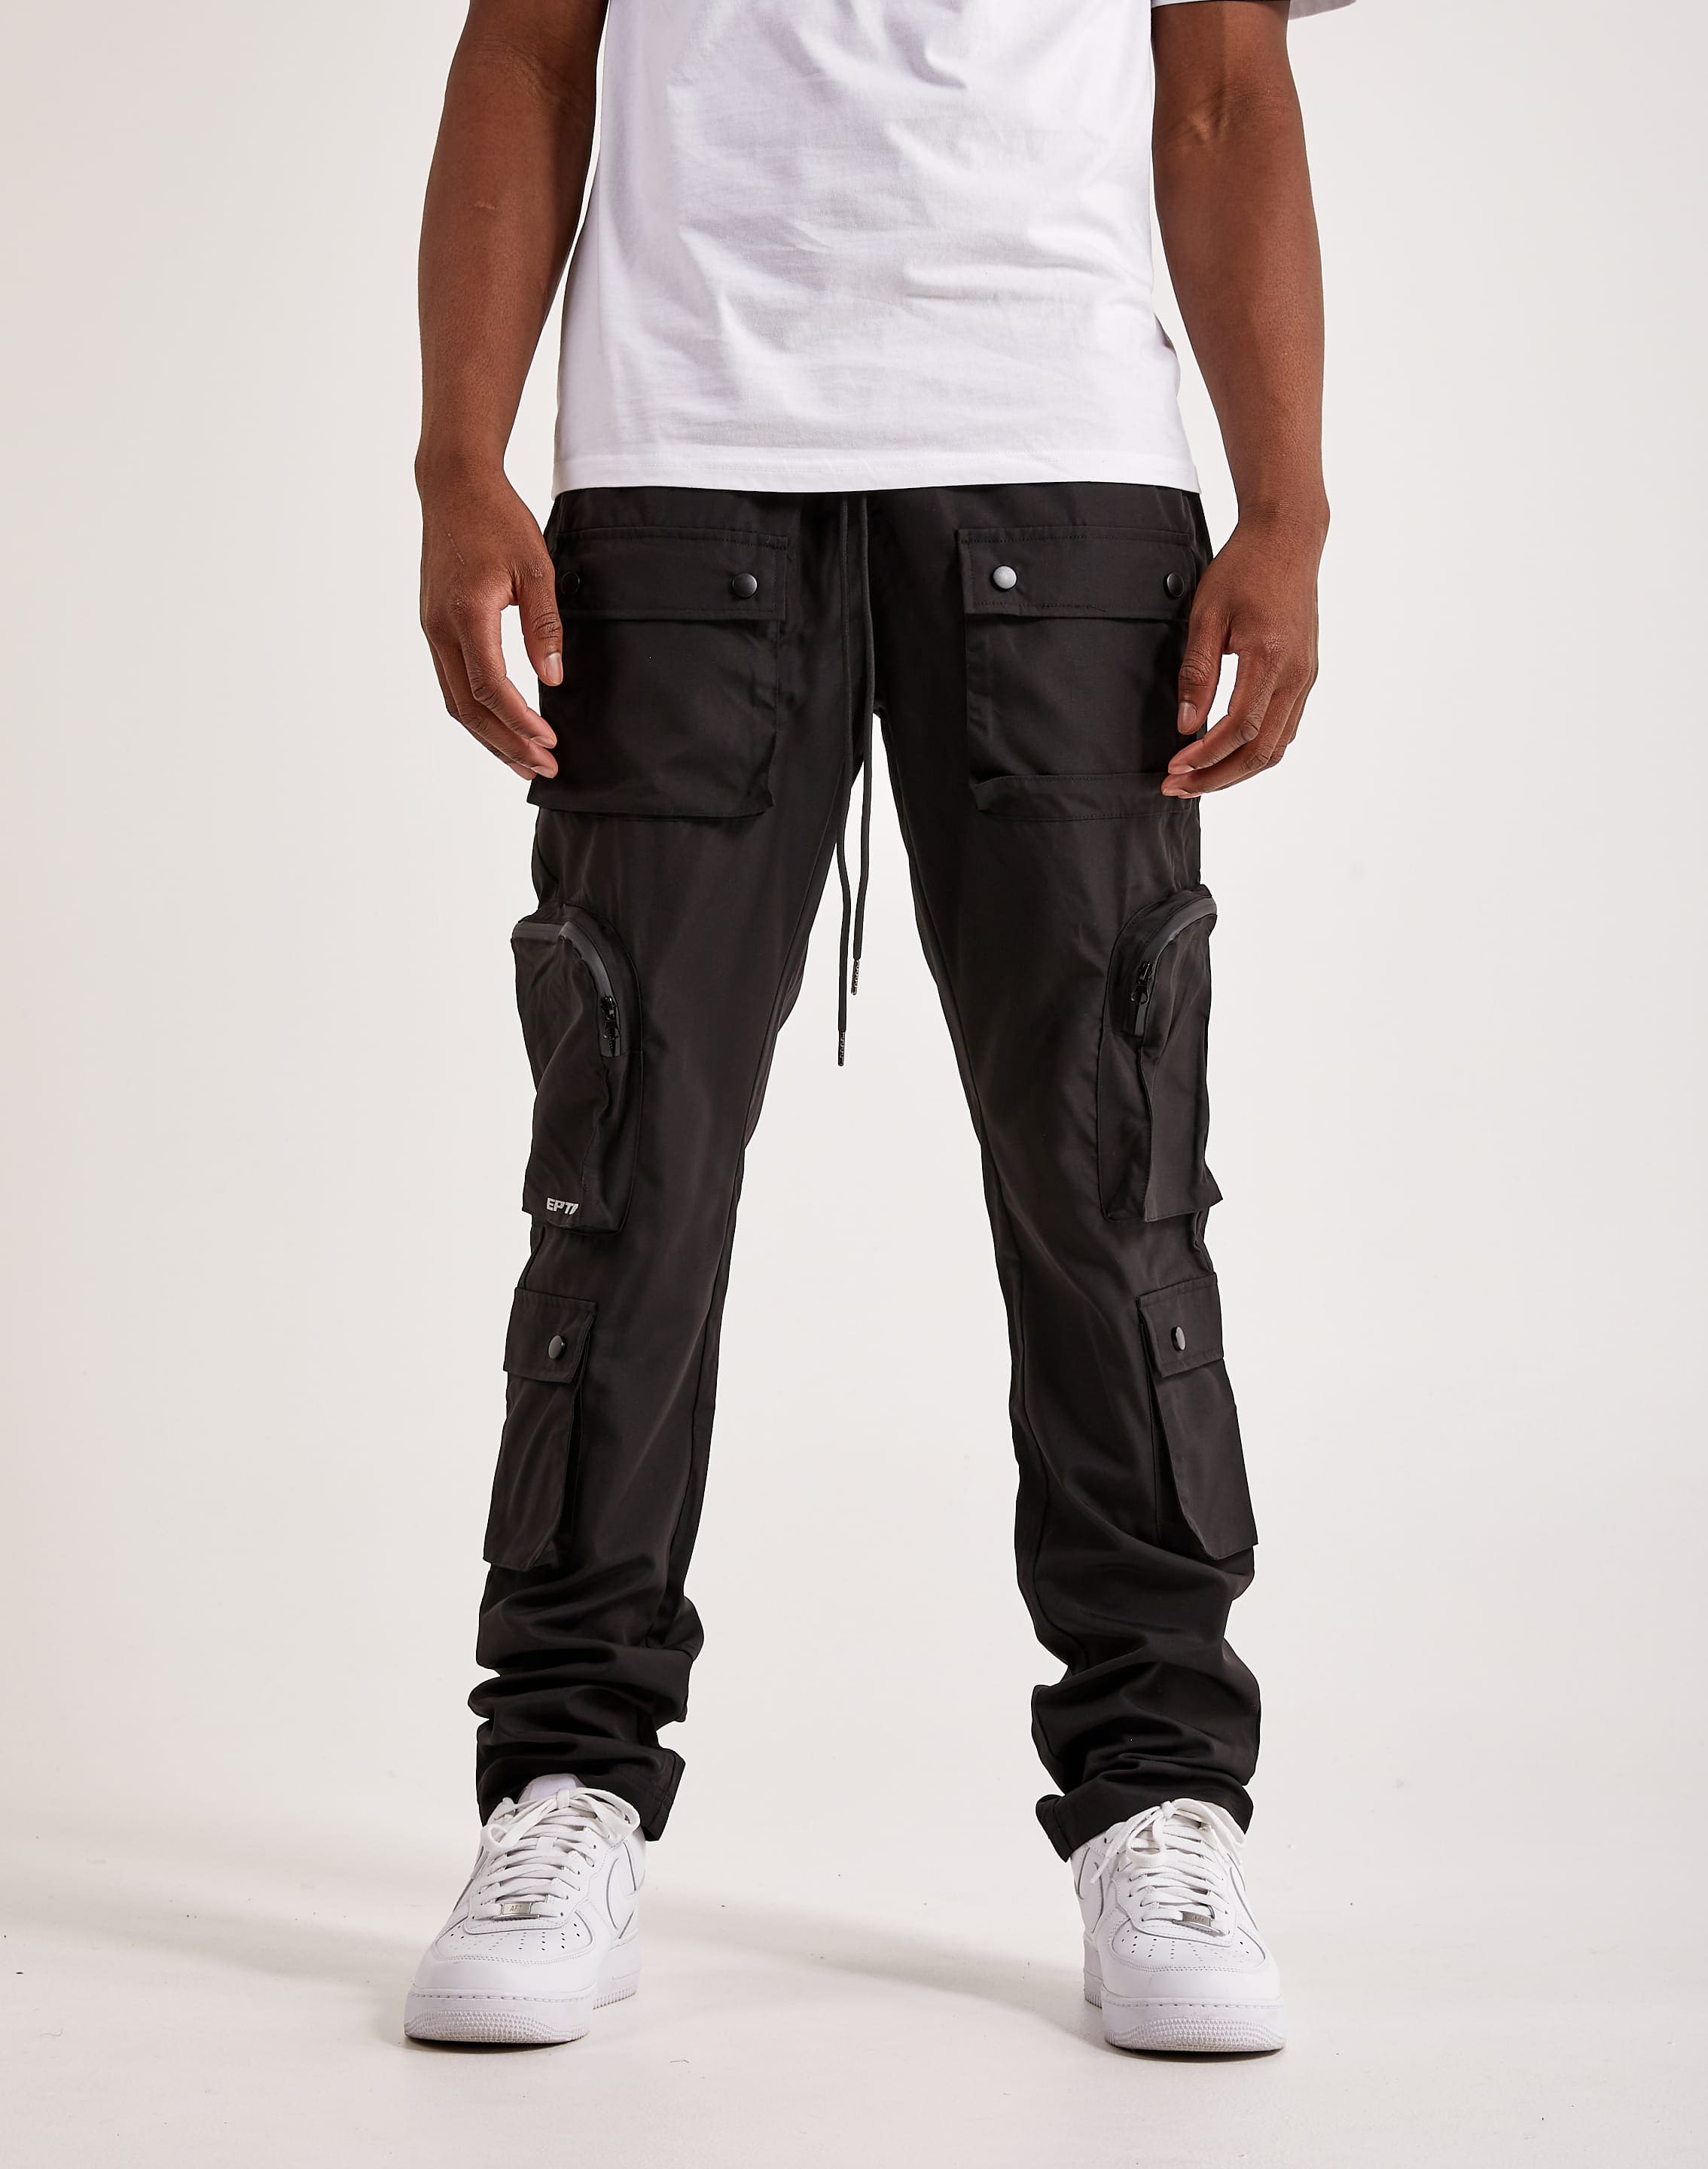 Buy Stylish Cargo Pants Online at Affordable Prices